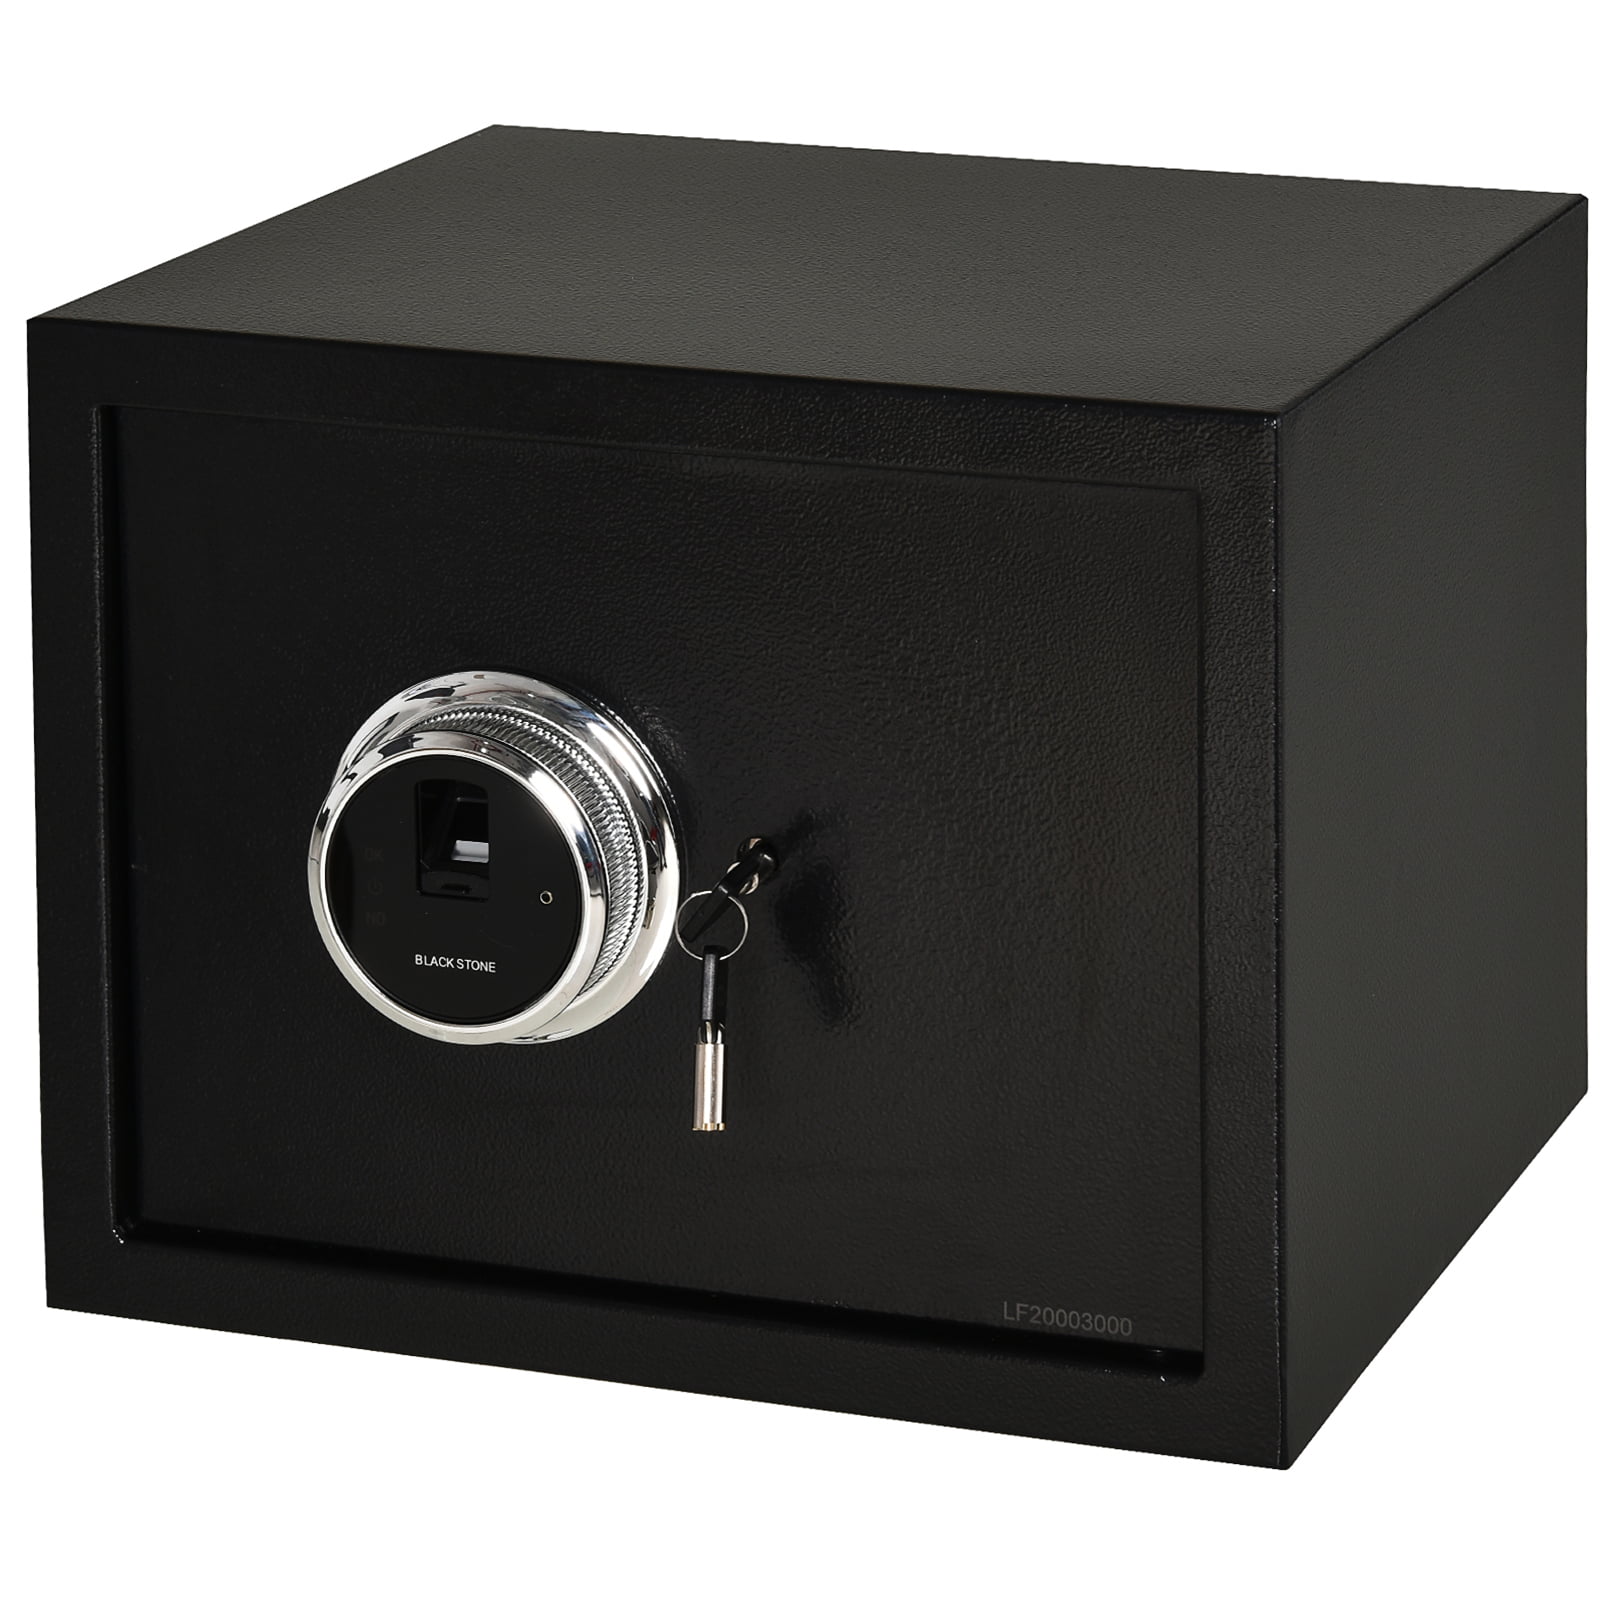 CB152 Stainless Steel Small Safe Box Strongbox Insurance Box Case With Keys Red 